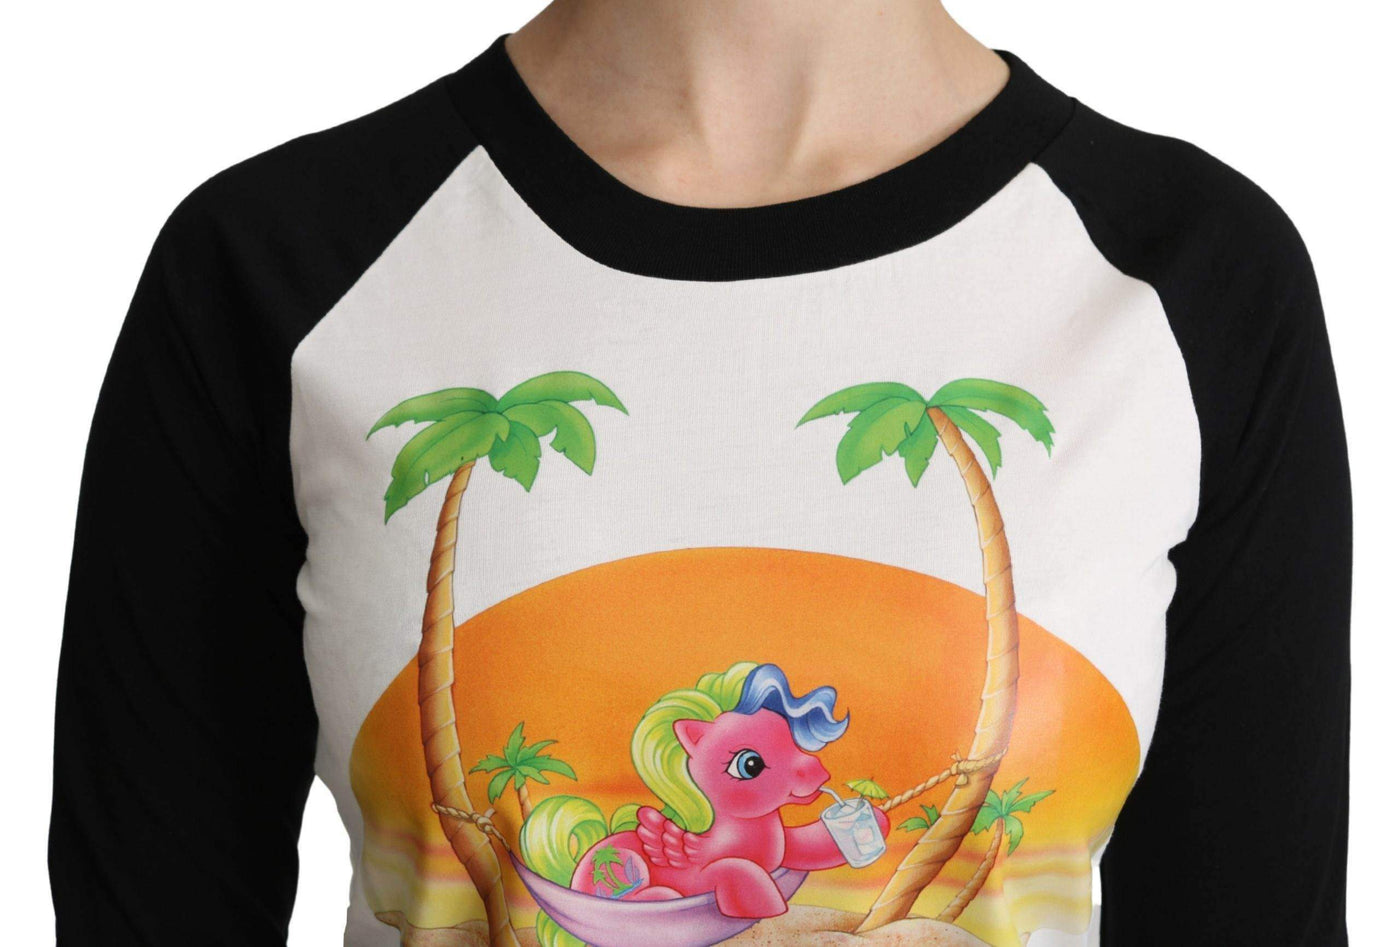 Moschino  Cotton T-shirt My Little Pony Top Tshirt #women, Catch, feed-agegroup-adult, feed-color-white, feed-gender-female, feed-size-IT36 | XS, feed-size-IT42|M, feed-size-IT44|L, Gender_Women, IT36 | XS, IT38 | S, IT42|M, IT44|L, Kogan, Moschino, Tops & T-Shirts - Women - Clothing, White, Women - New Arrivals at SEYMAYKA